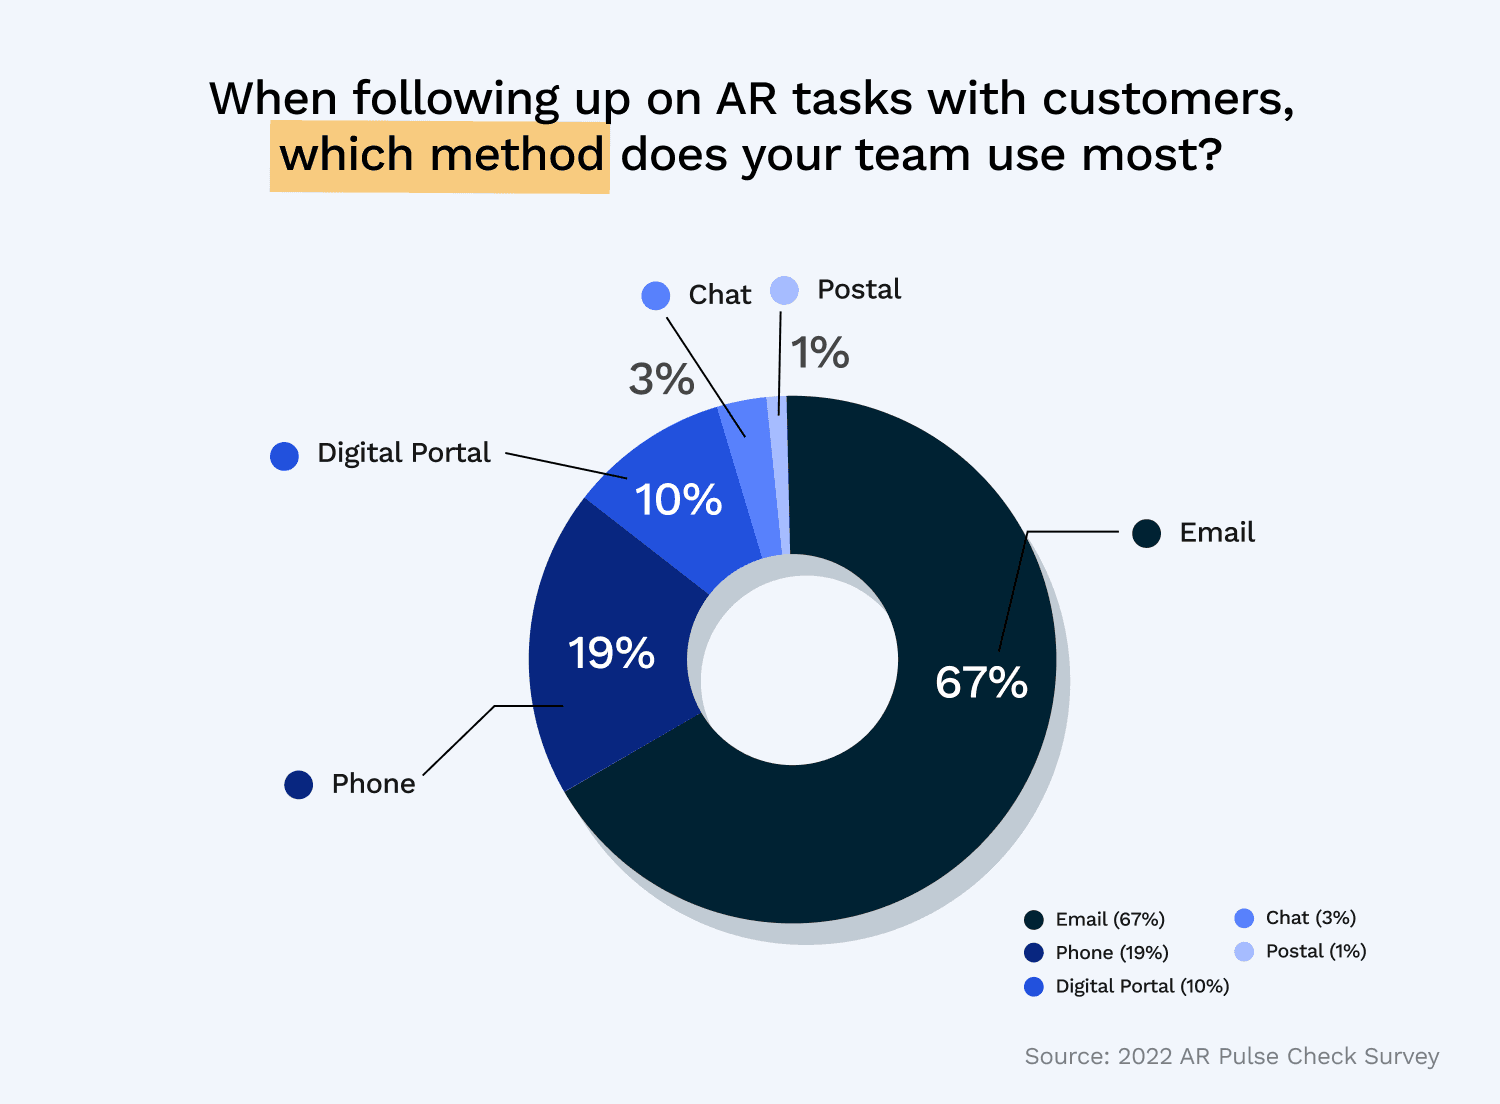 The methods AR teams use to follow up with customers